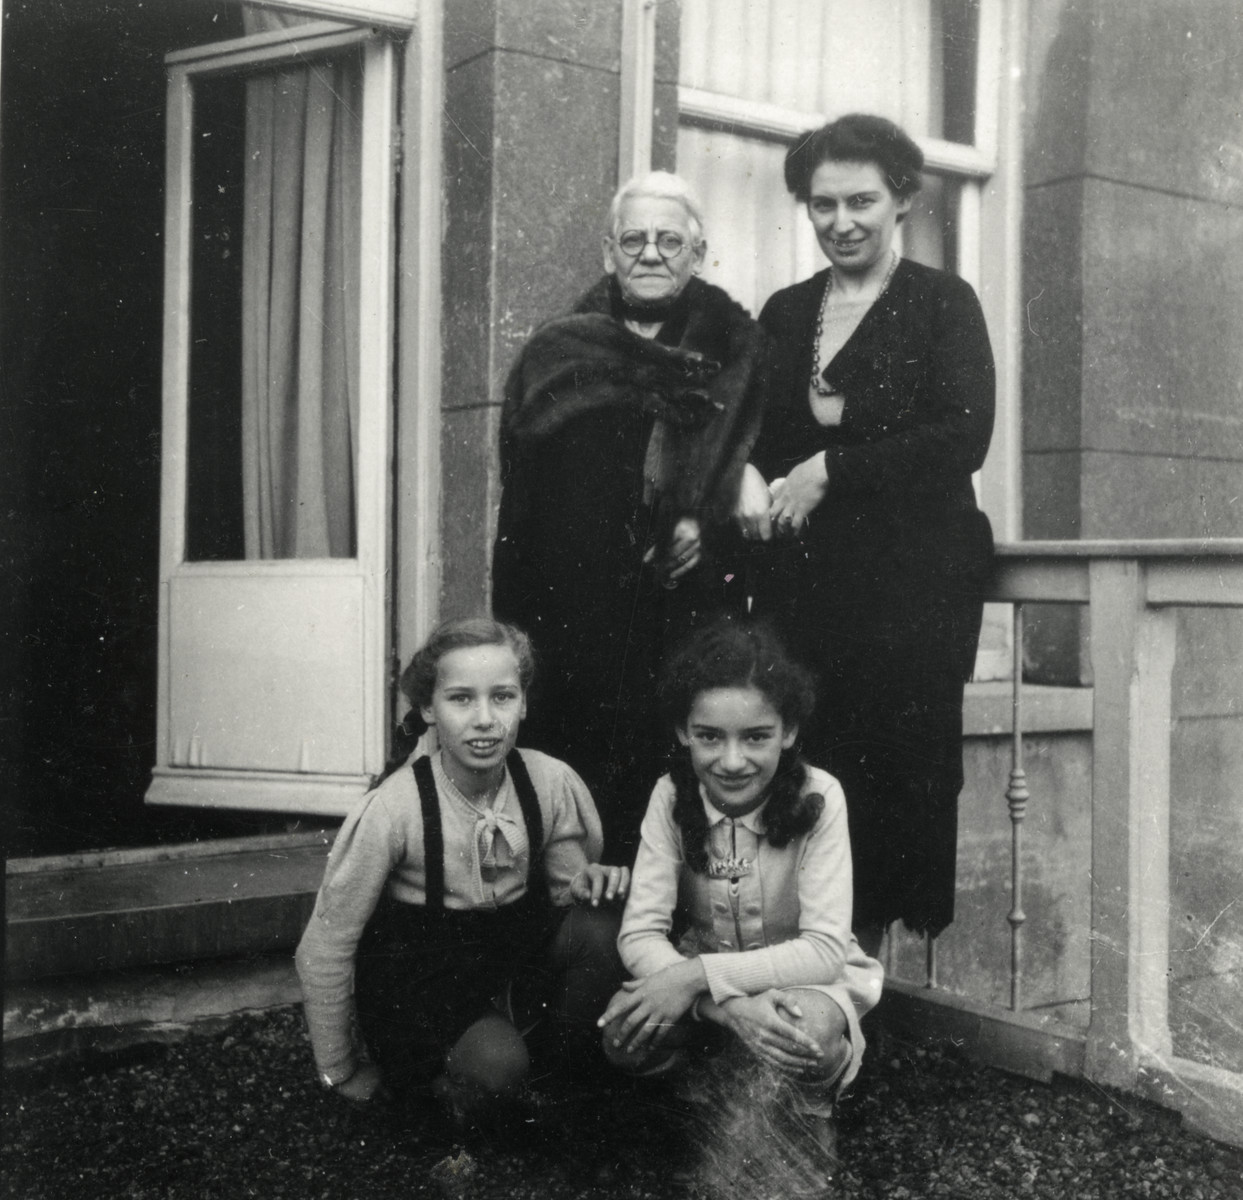 Prewar photograph of the women of the van Collem family standing outside their apartment.

Pictured are Marta and Ilse van Collem, their mother Lotte and grandmother.